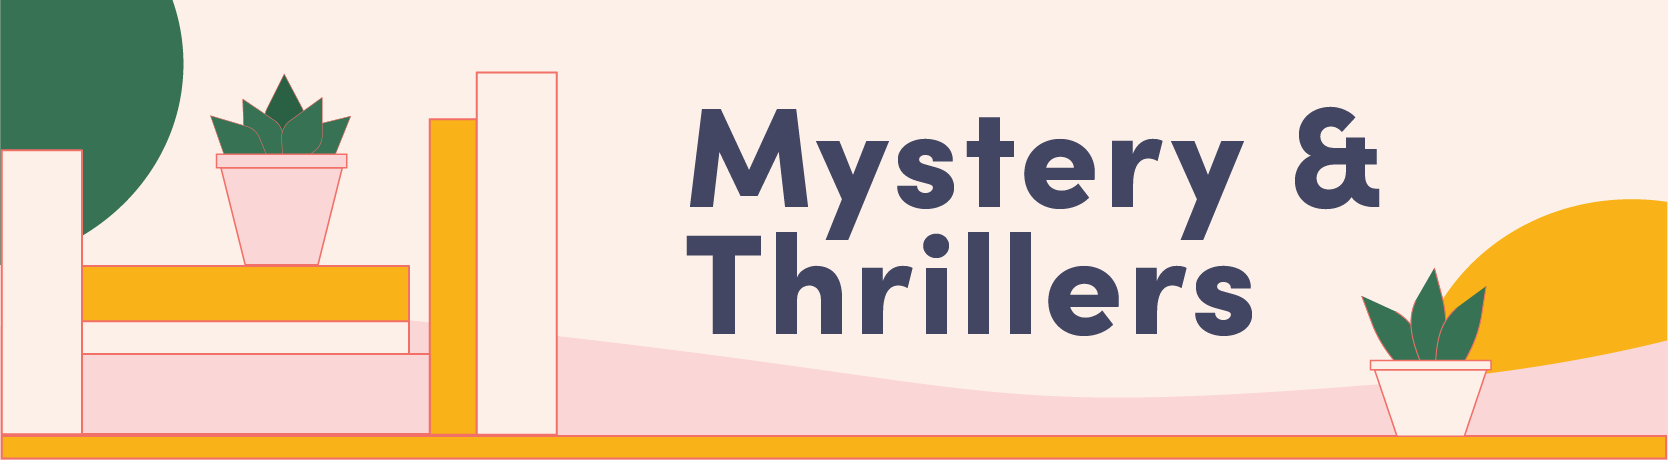 mysterty and thrillers